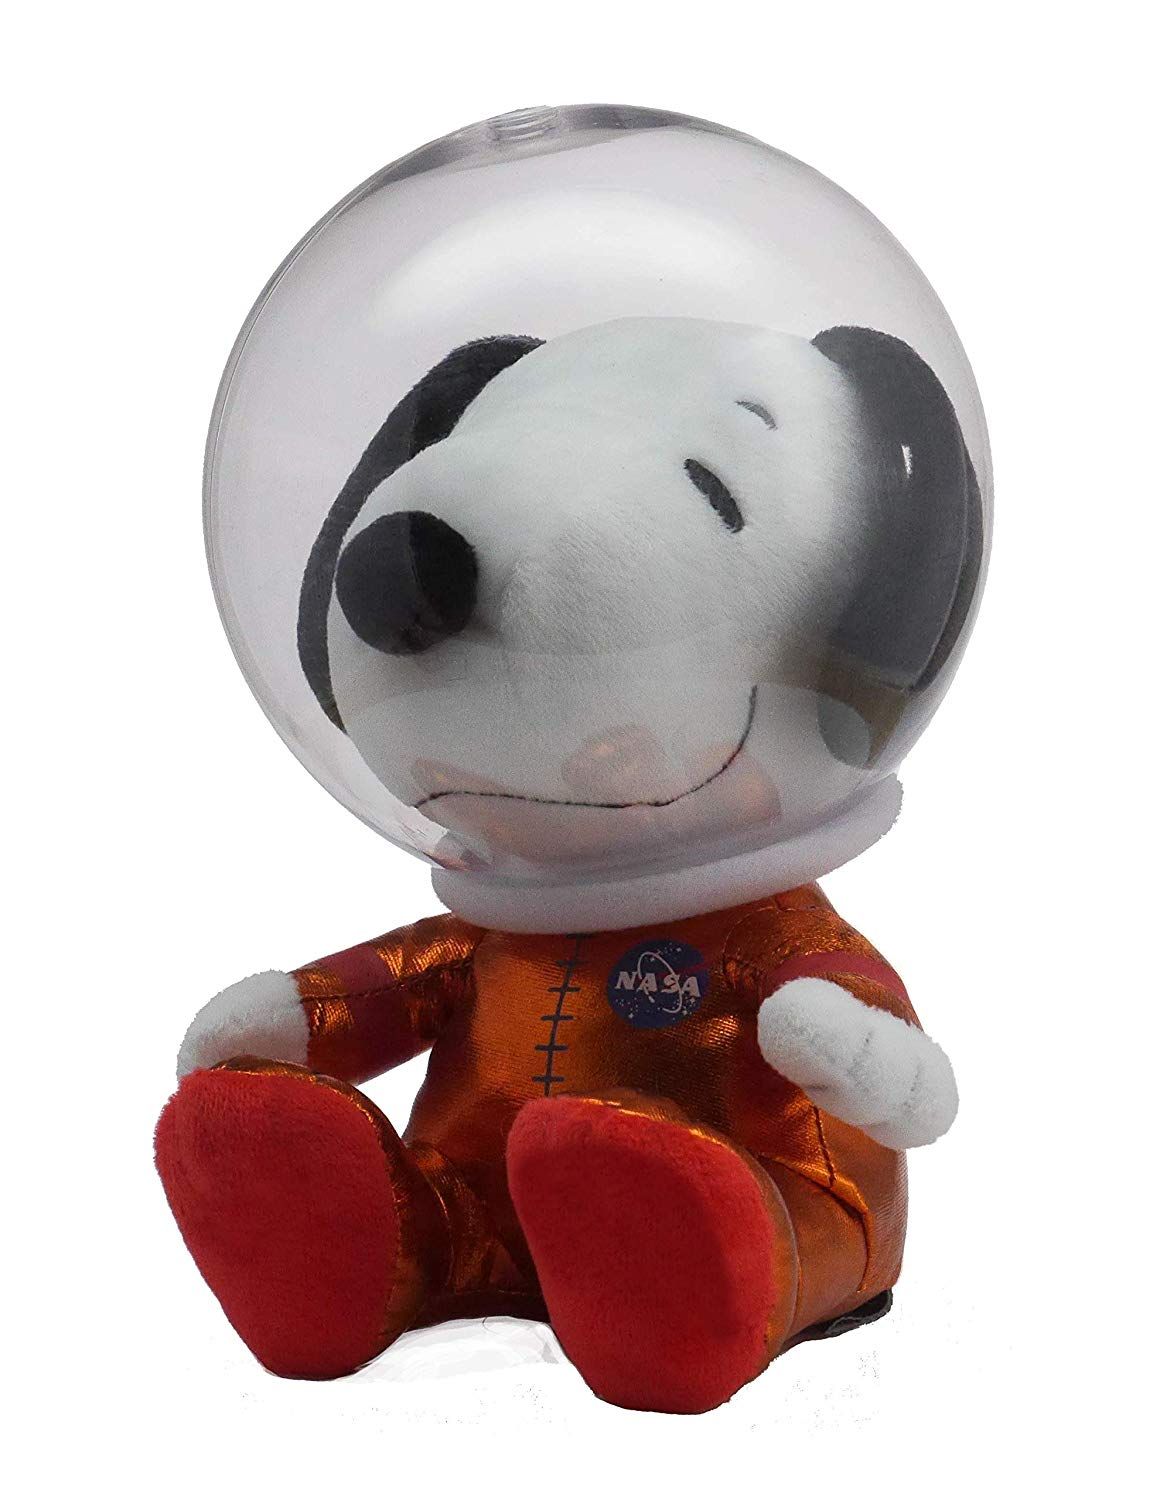 space snoopy toy